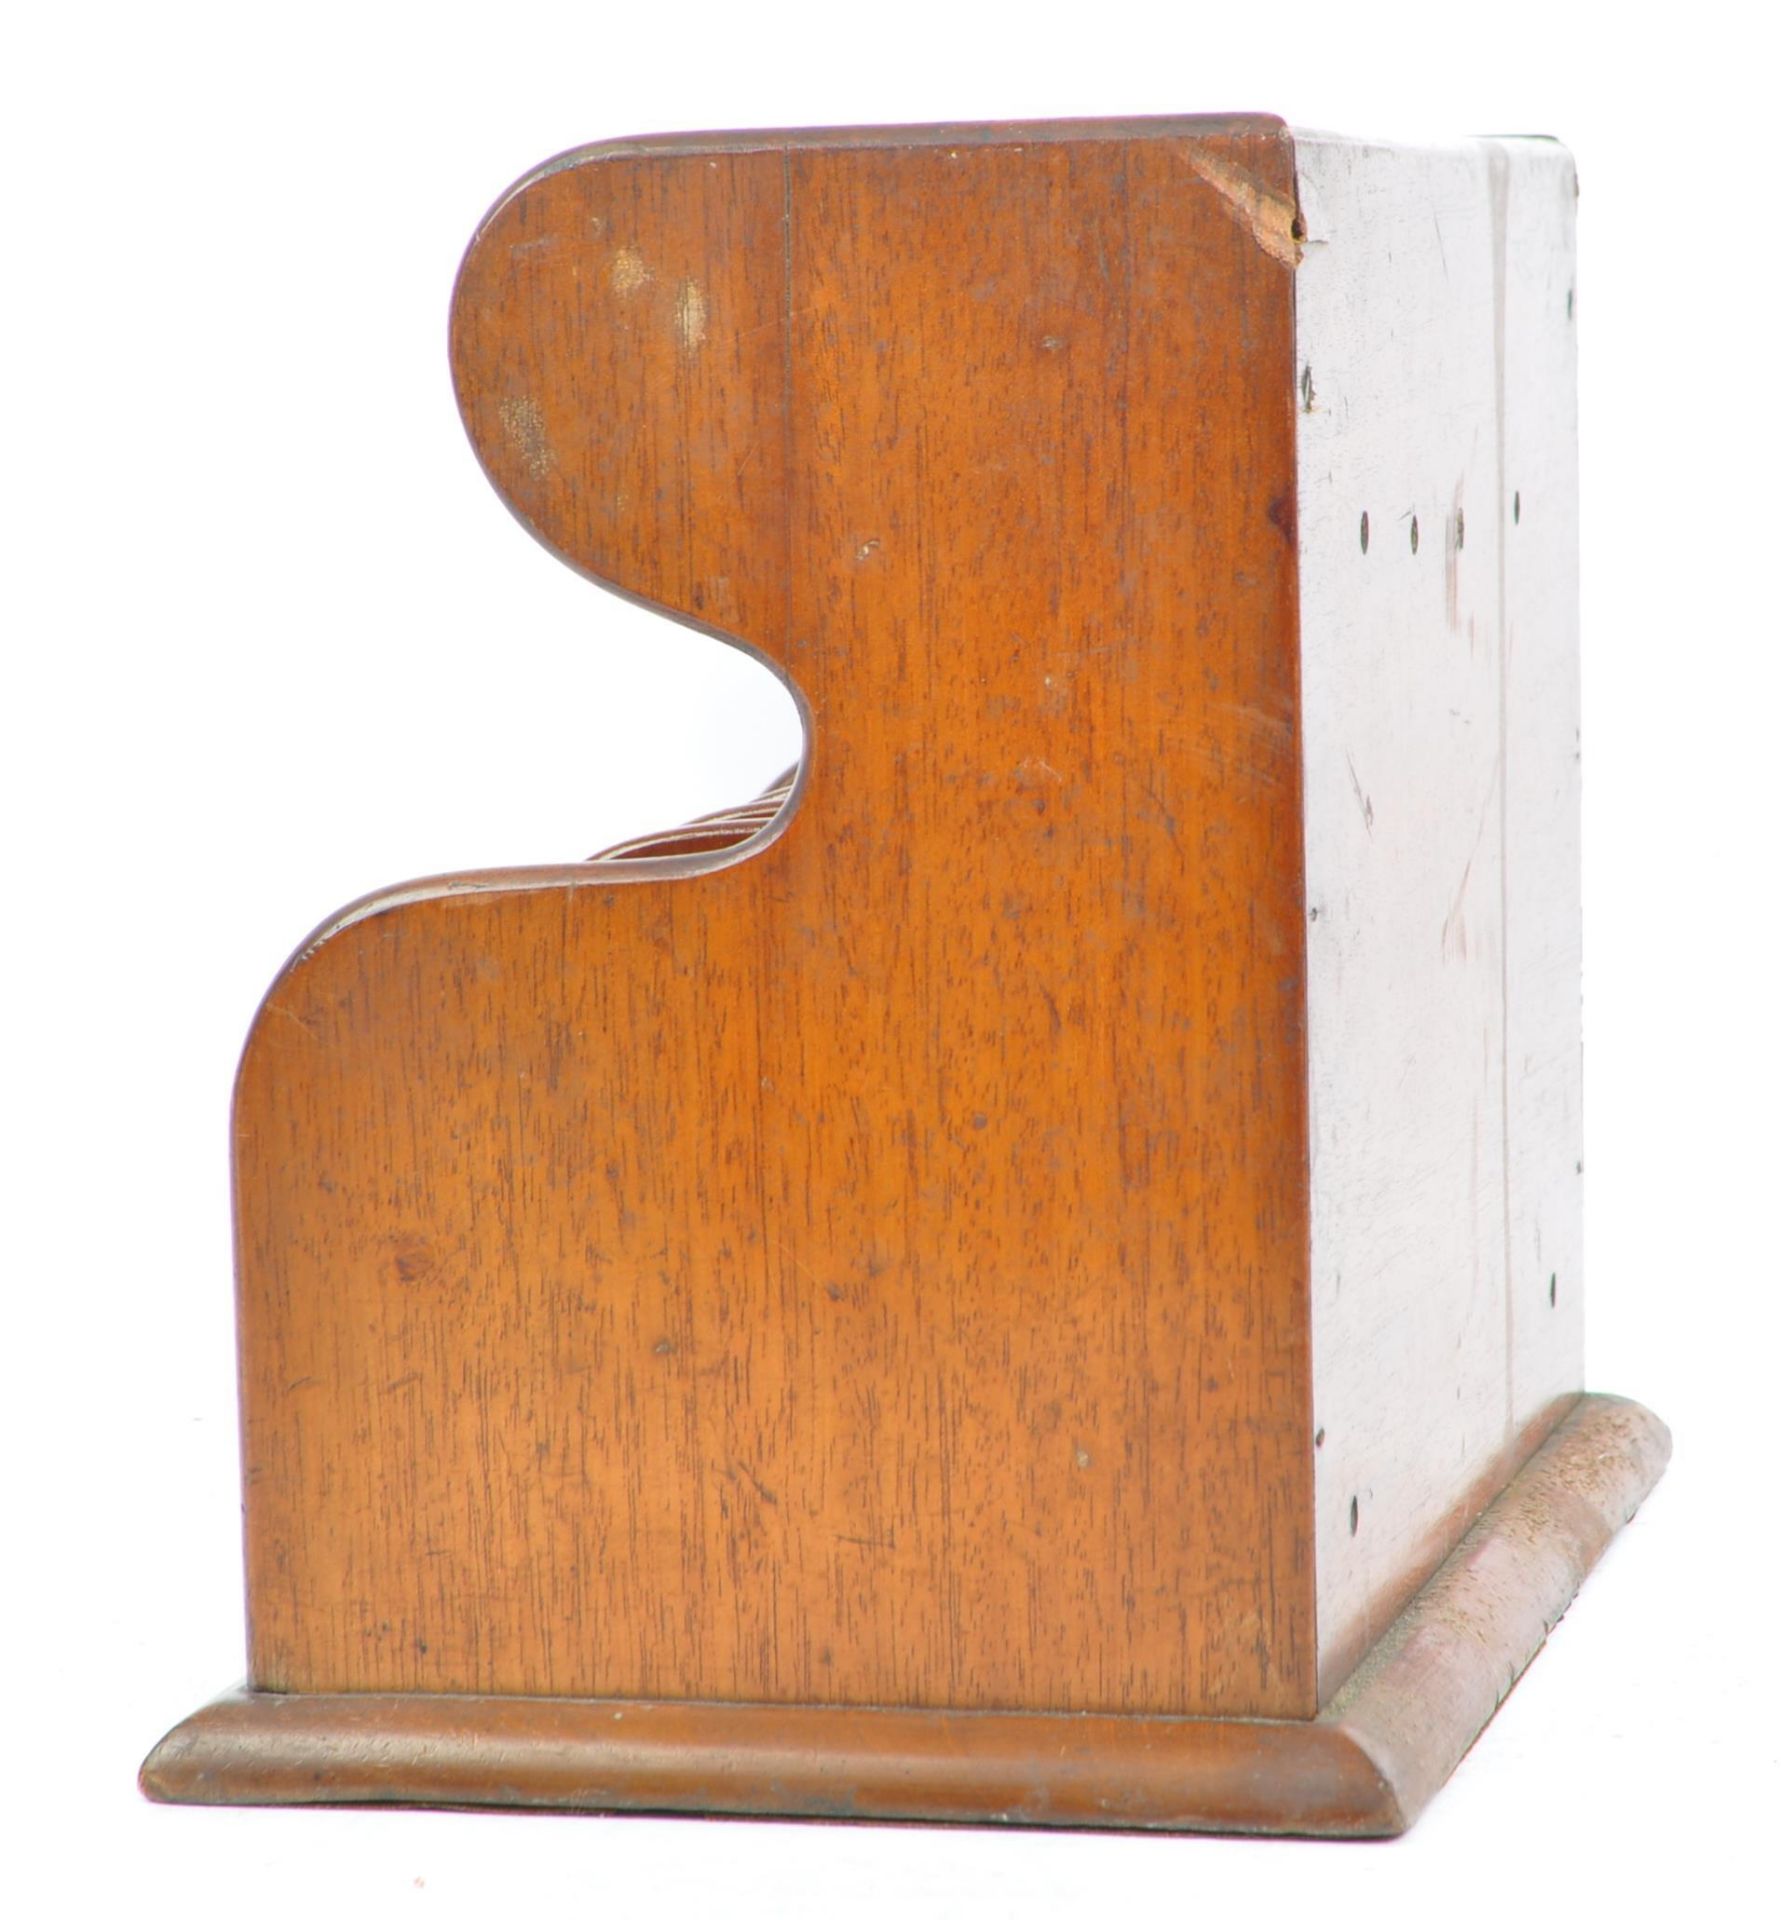 EARLY 20TH CENTURY MAHOGANY WOOD DESK LETTER RACK - Image 3 of 6